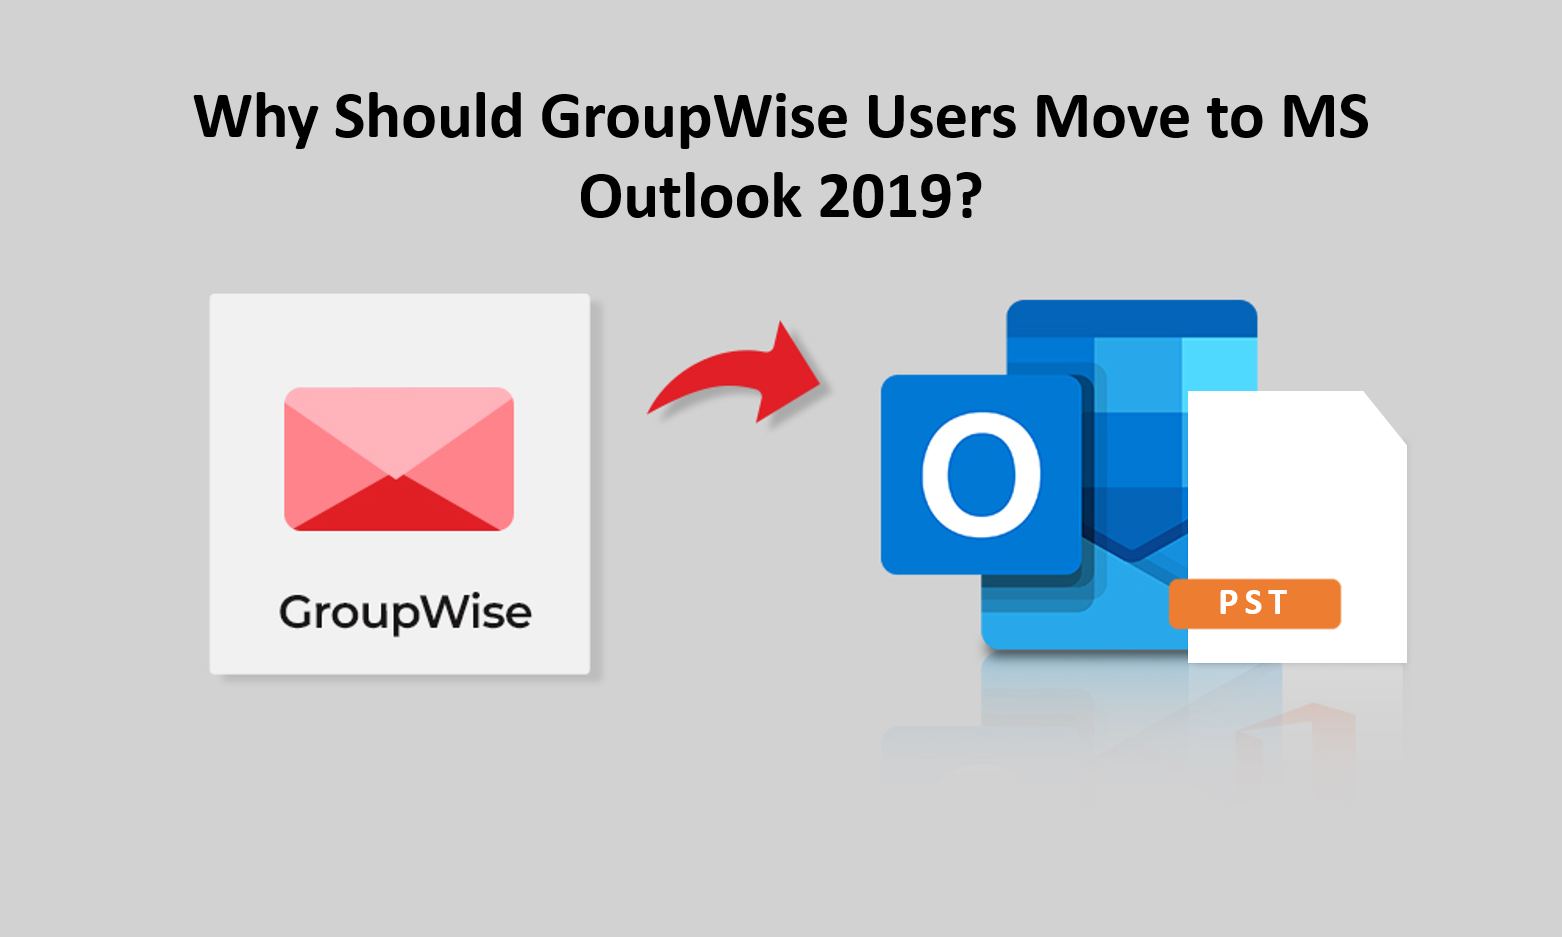 Why Should GroupWise Users Move to MS Outlook 2019